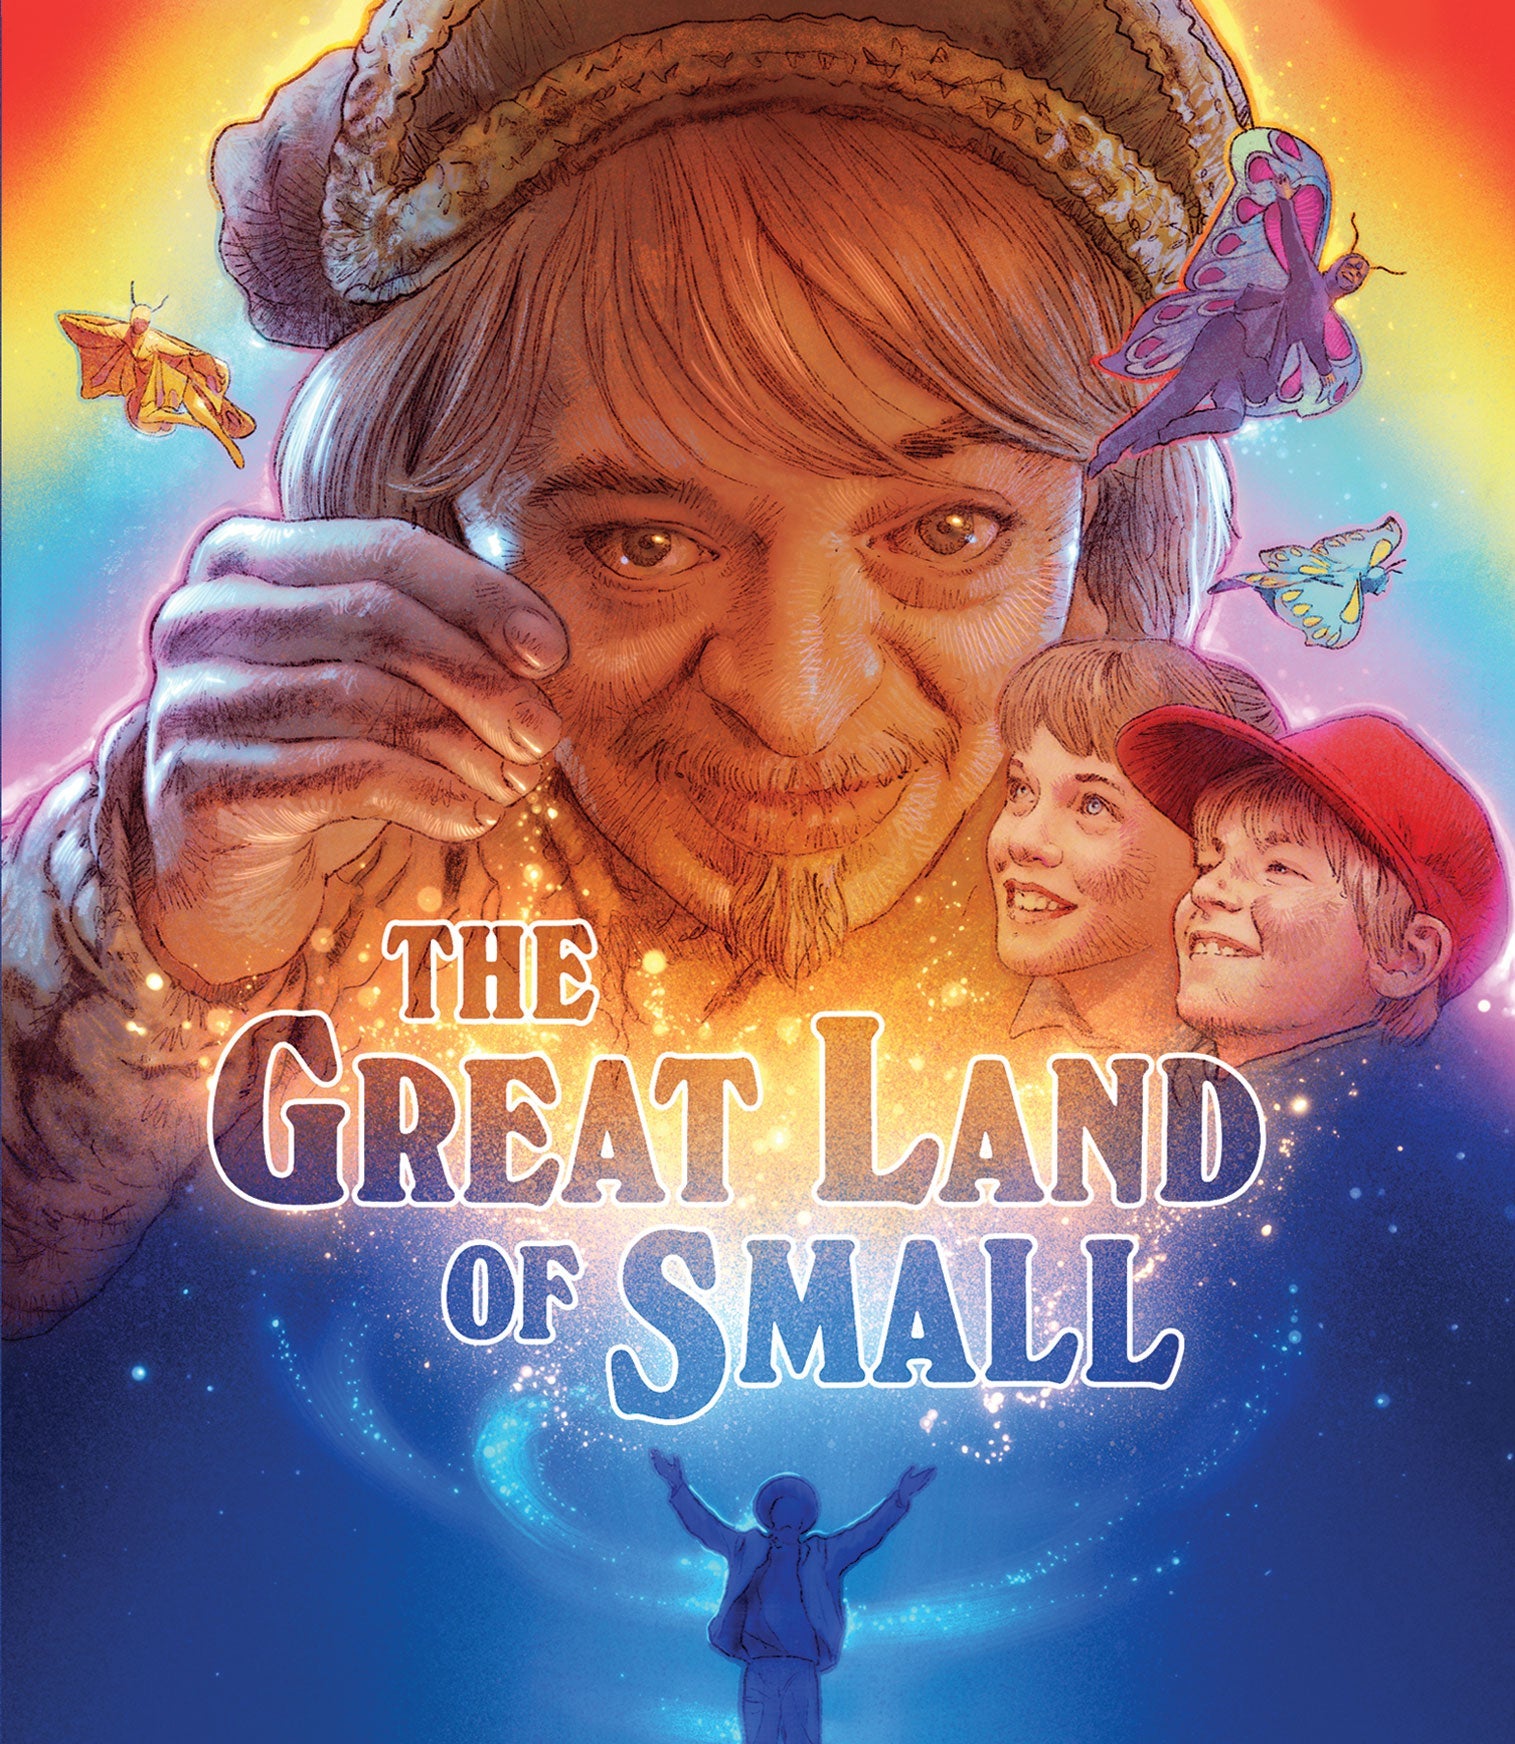 THE GREAT LAND OF SMALL (LIMITED EDITION) BLU-RAY